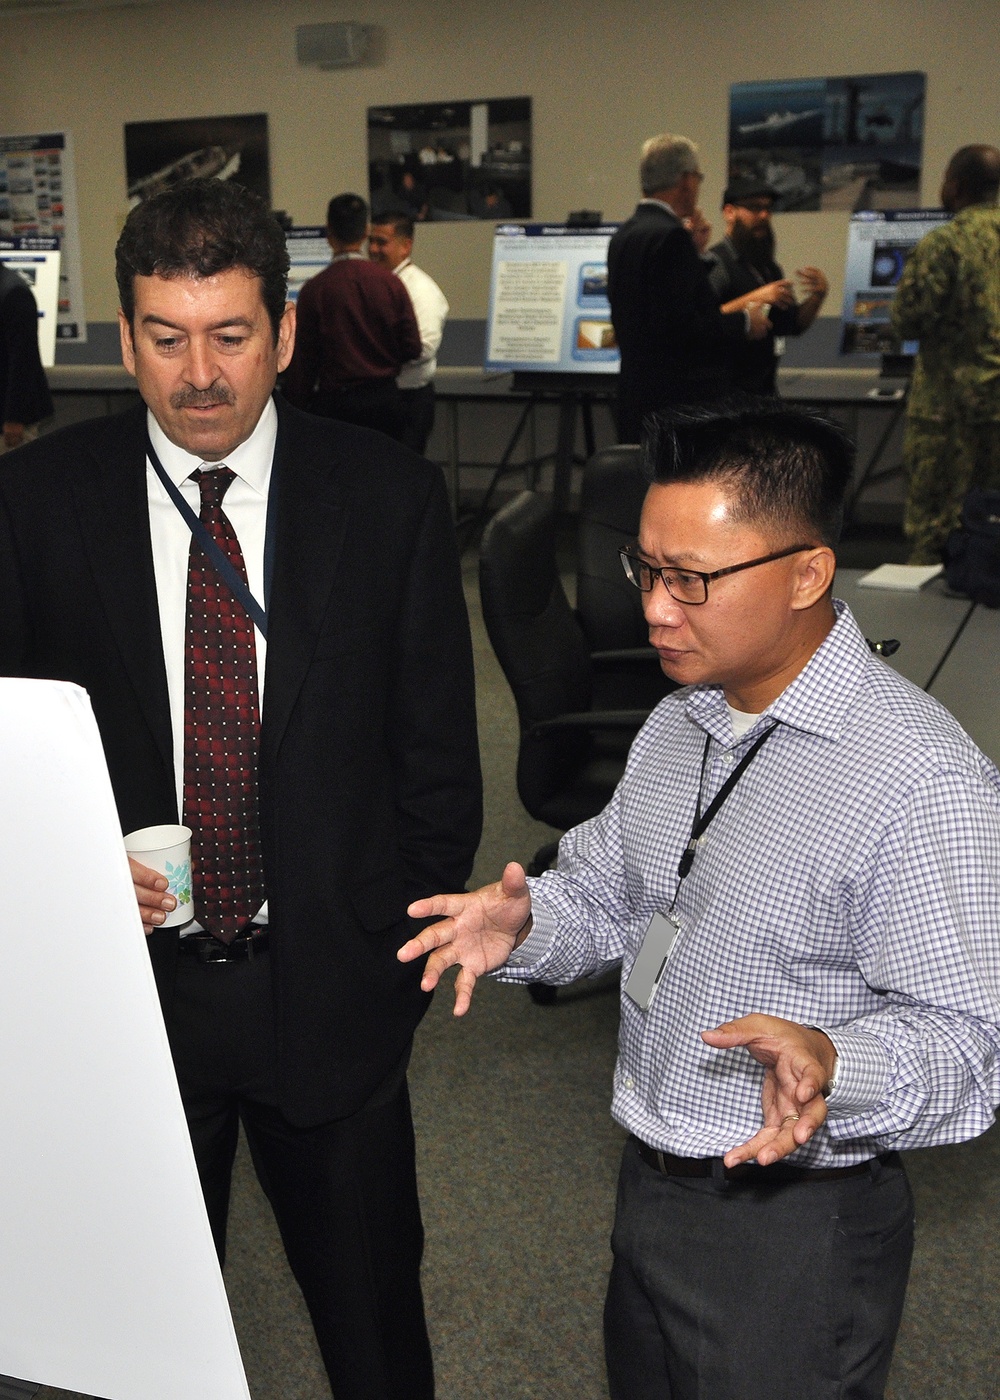 NAVFAC EXWC collaborates with NSWC PHD at Naval Innovative Science and Engineering event